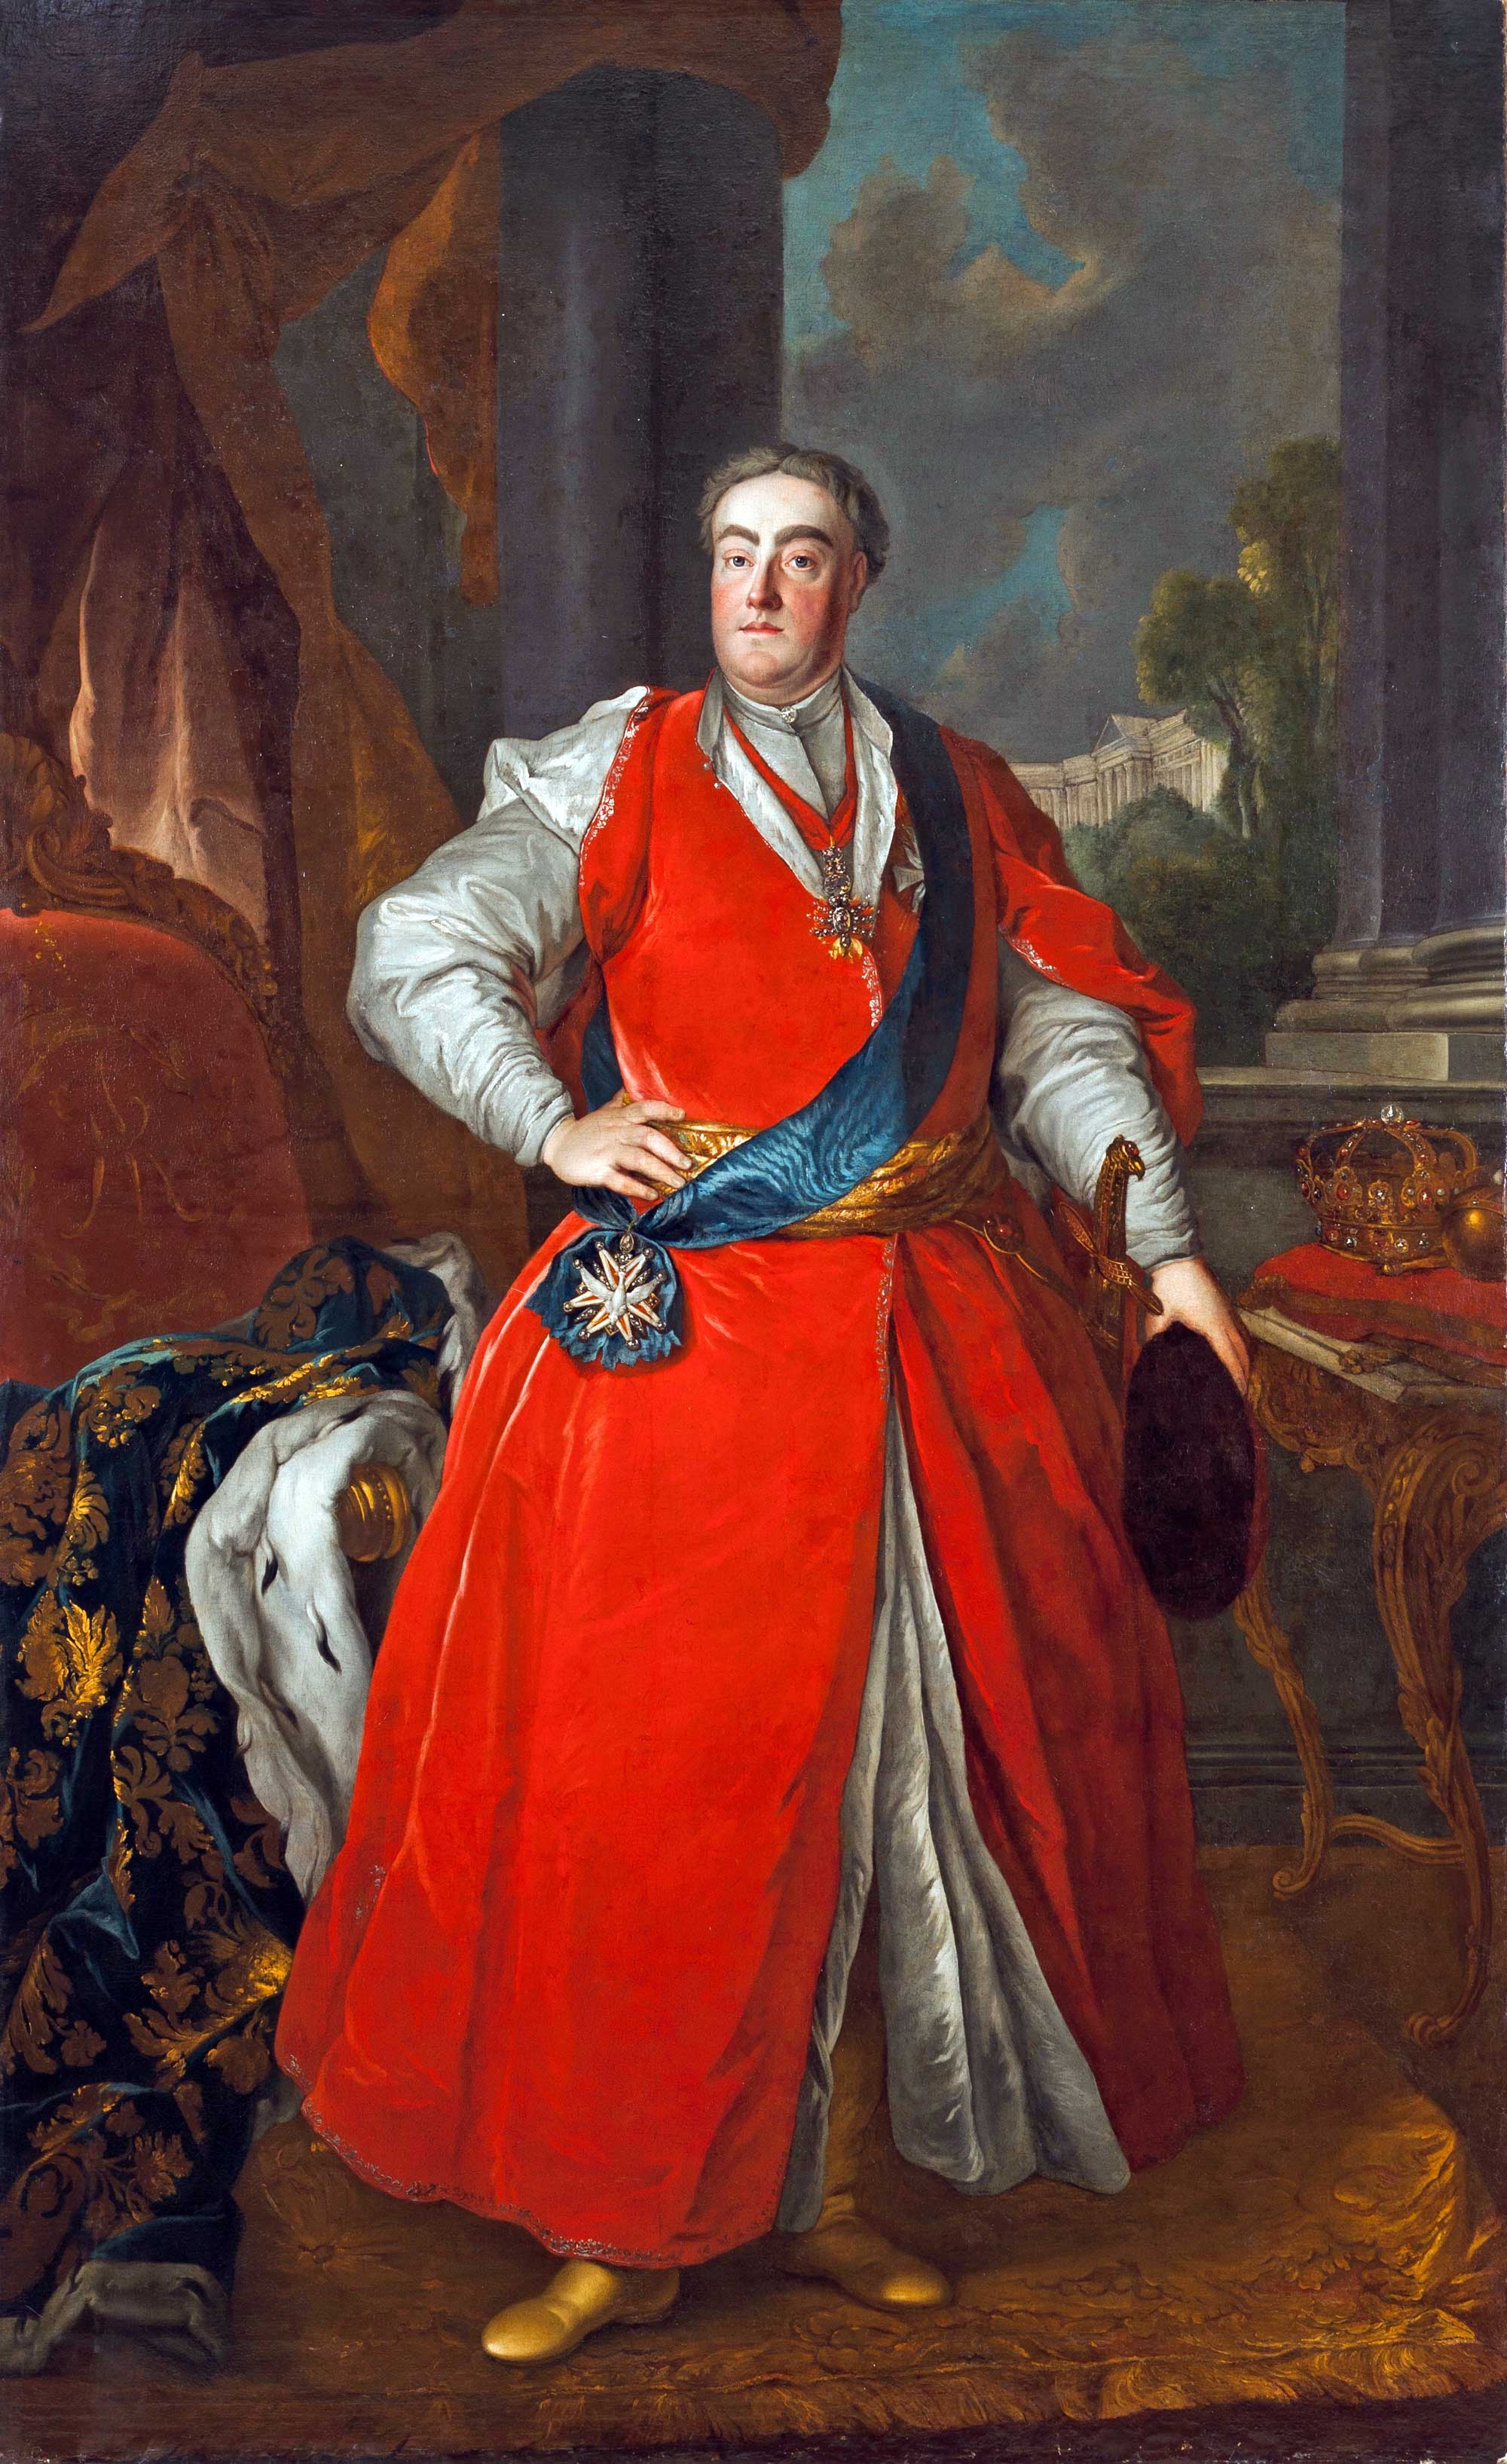 Portrait of Augustus III of Poland, Elector of Saxony -- workshop of Louis de Silvestre. He wears Polish garb and the Orders of the Golden Fleece and of the Holy Spirit. On the left hand side, on a chair upholstered with his crowned monogram, lies the mantle that the Saxon Government offered him for his coronation. To the right of the composition are, on a console, the insignias of regal power: crown, sceptre, and orb (Wikipedia).